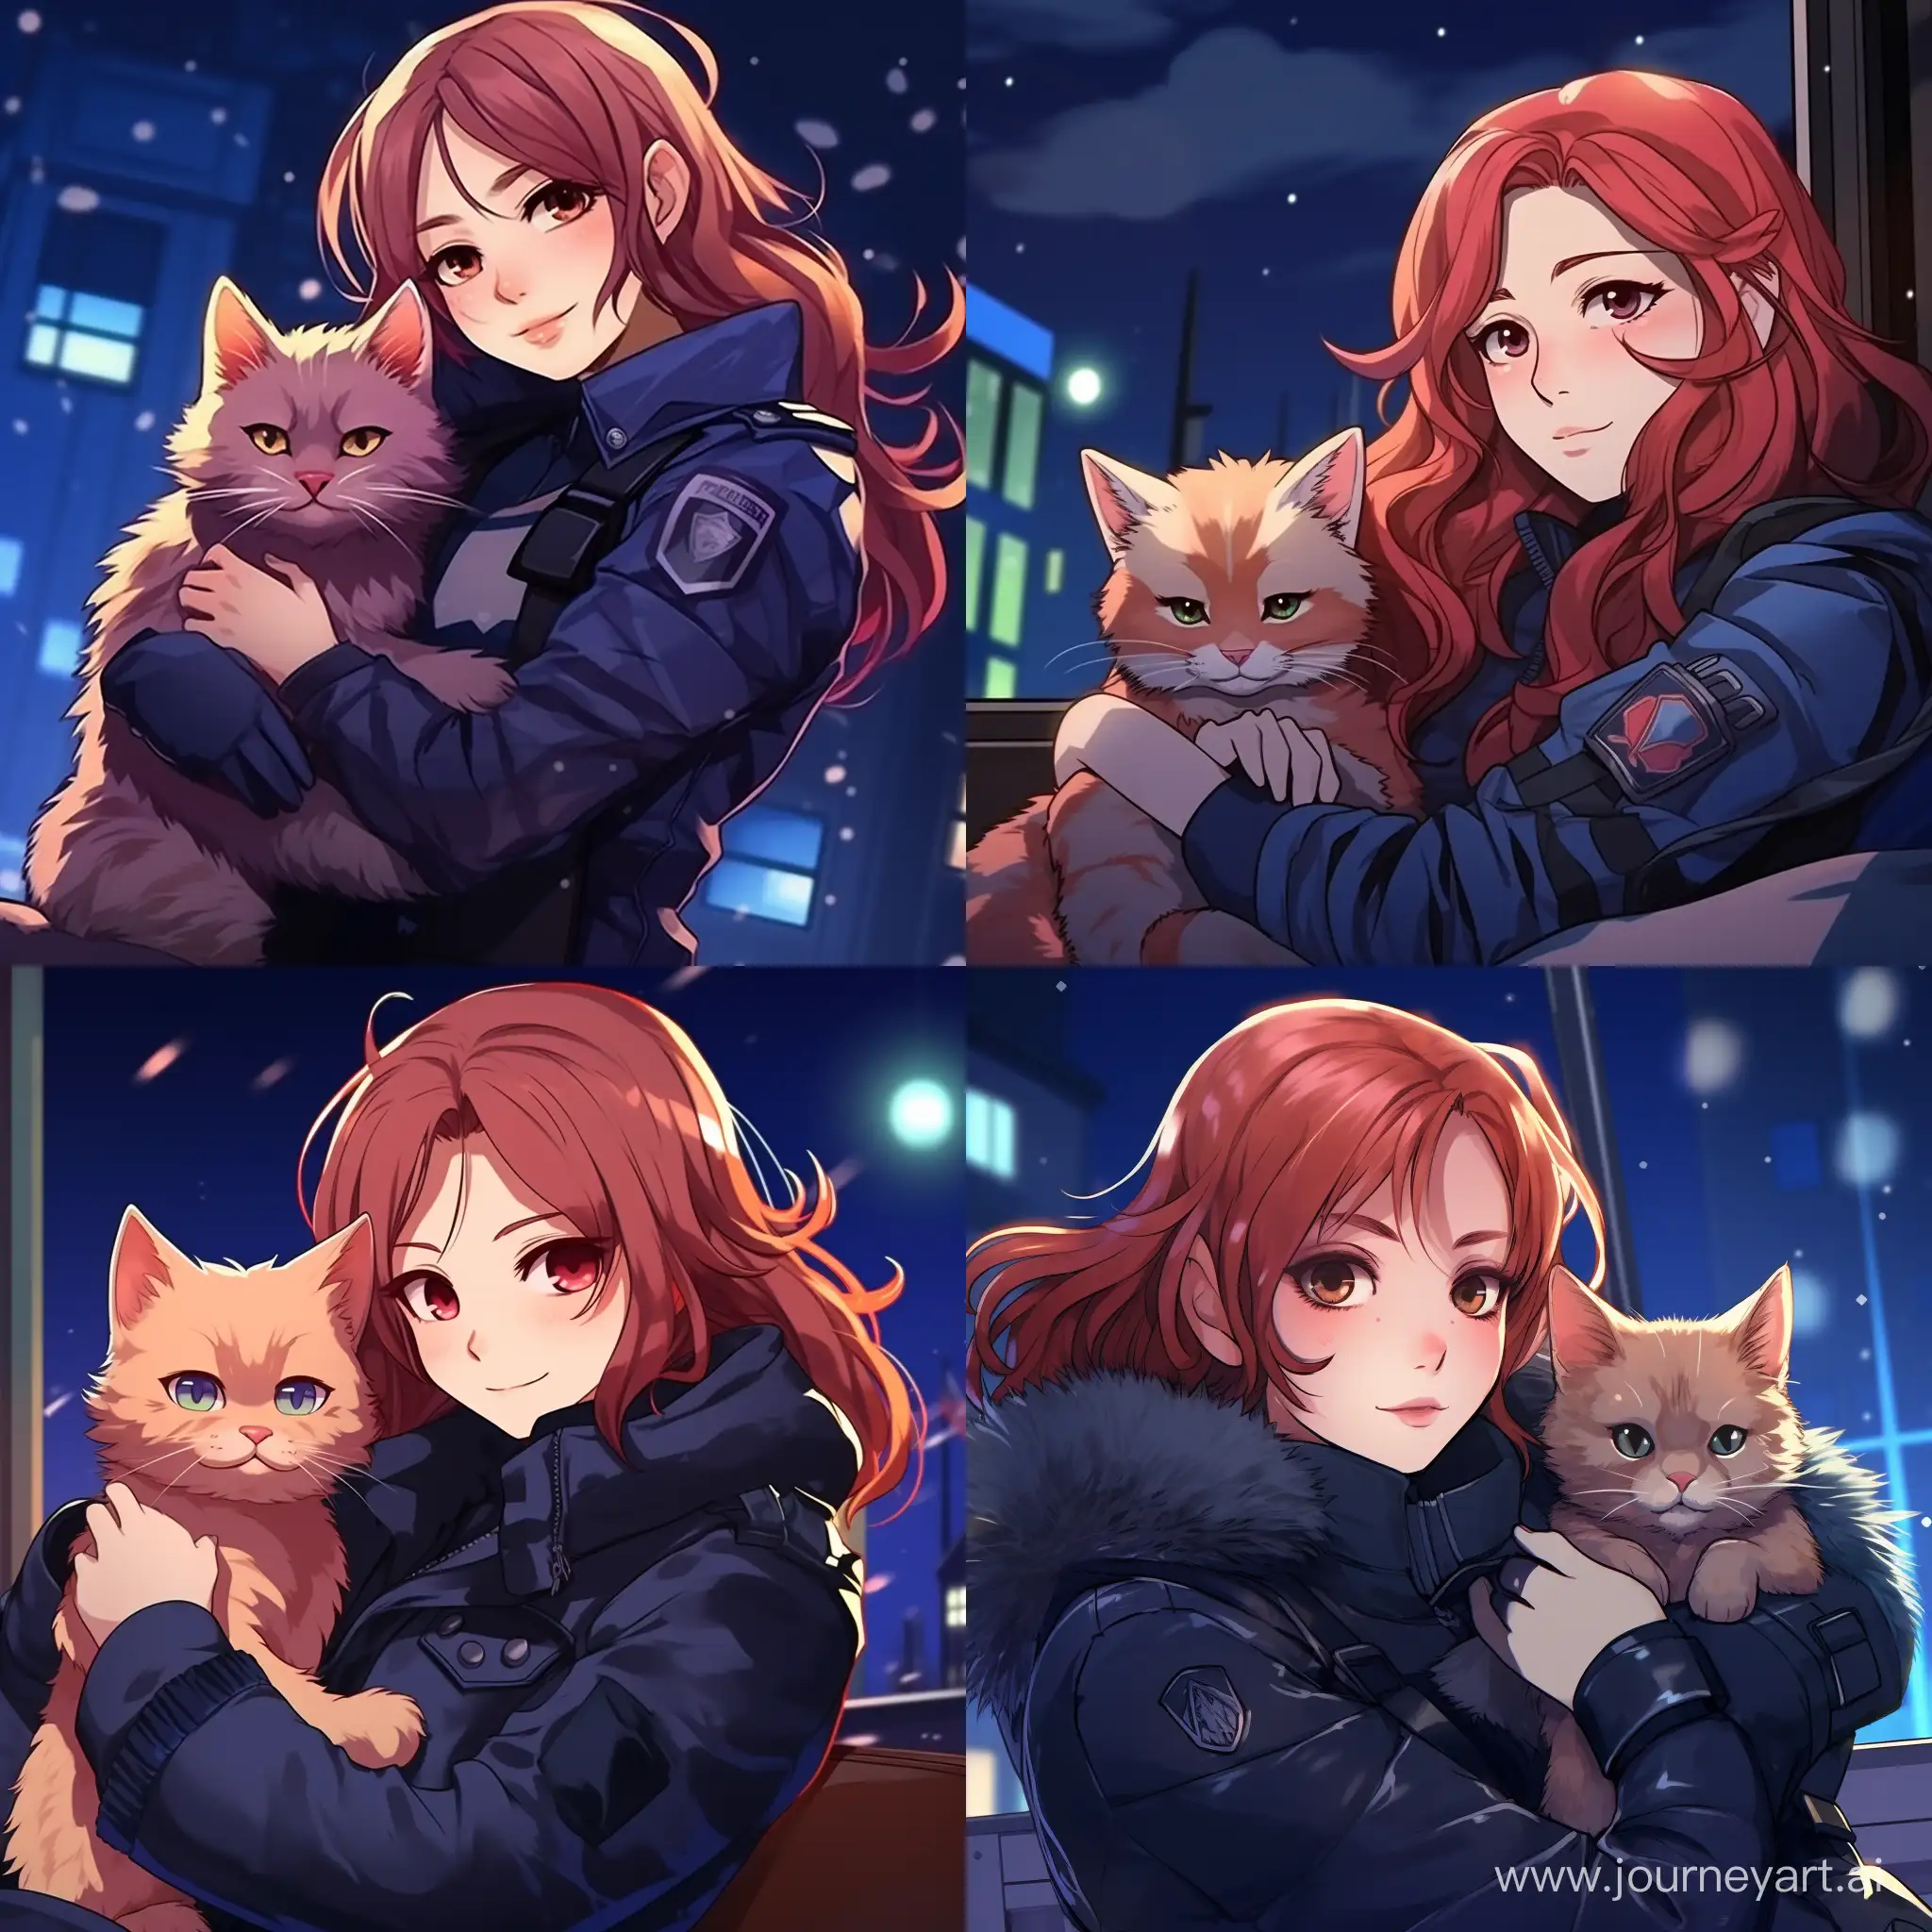 AnimeInspired-Winter-Night-RedHaired-Girl-in-Police-Uniform-with-Cat